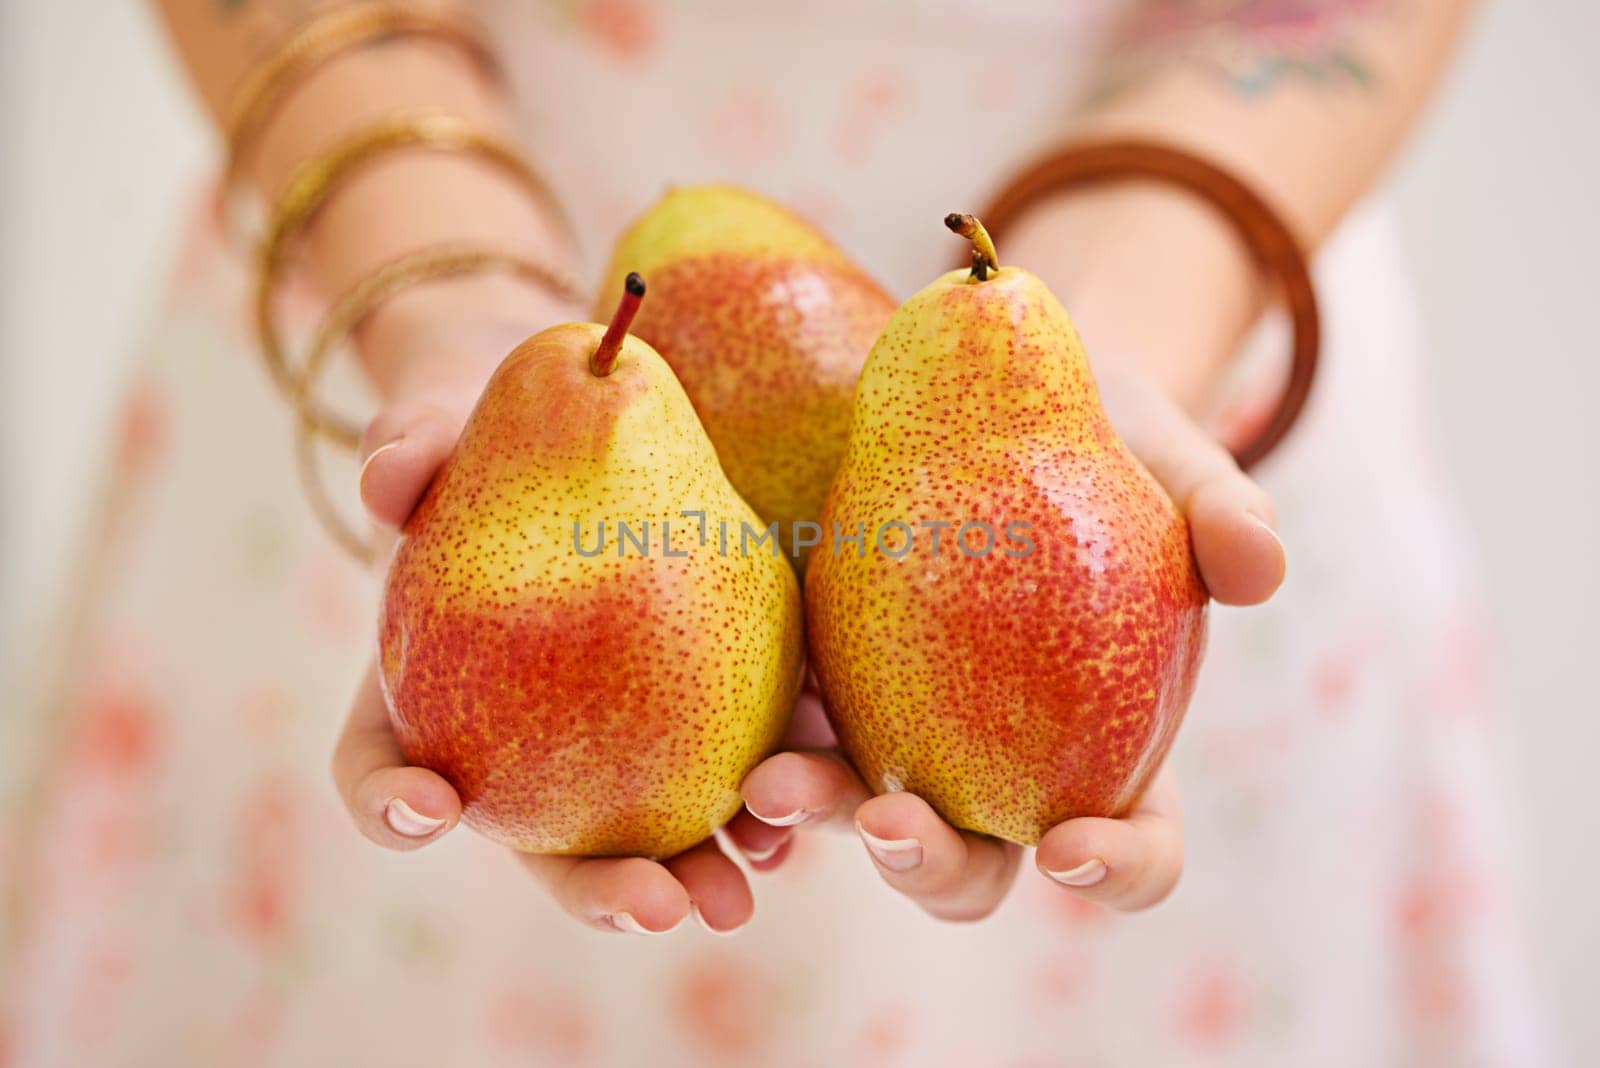 Woman, hands and fruit or pears for health, organic and balanced diet by eating nutrition snacks. Person, fresh and wellness with natural ingredients for vitamin from farming at green plantation.